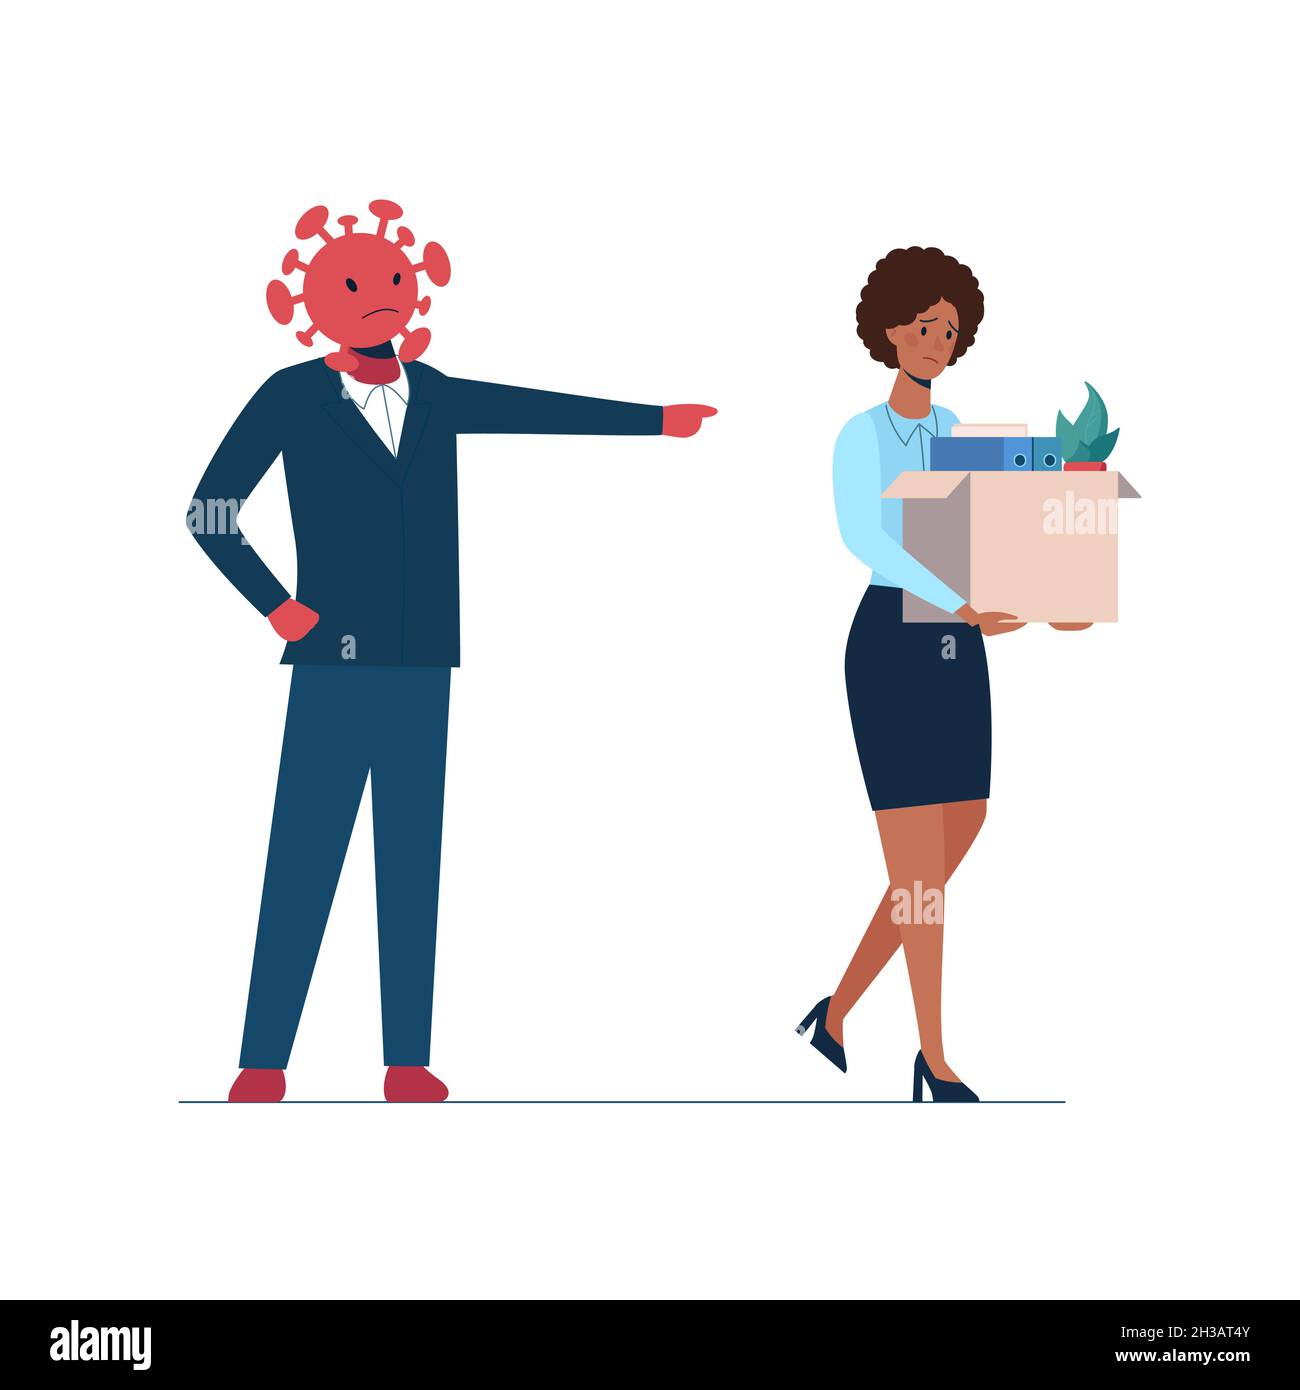 Job loss due to covid-19 virus, economic downturn. The coronavirus leaves people unemployed. A fired African woman leave the office with a box in their hands. Vector. Dismissed employeest Stock Vector